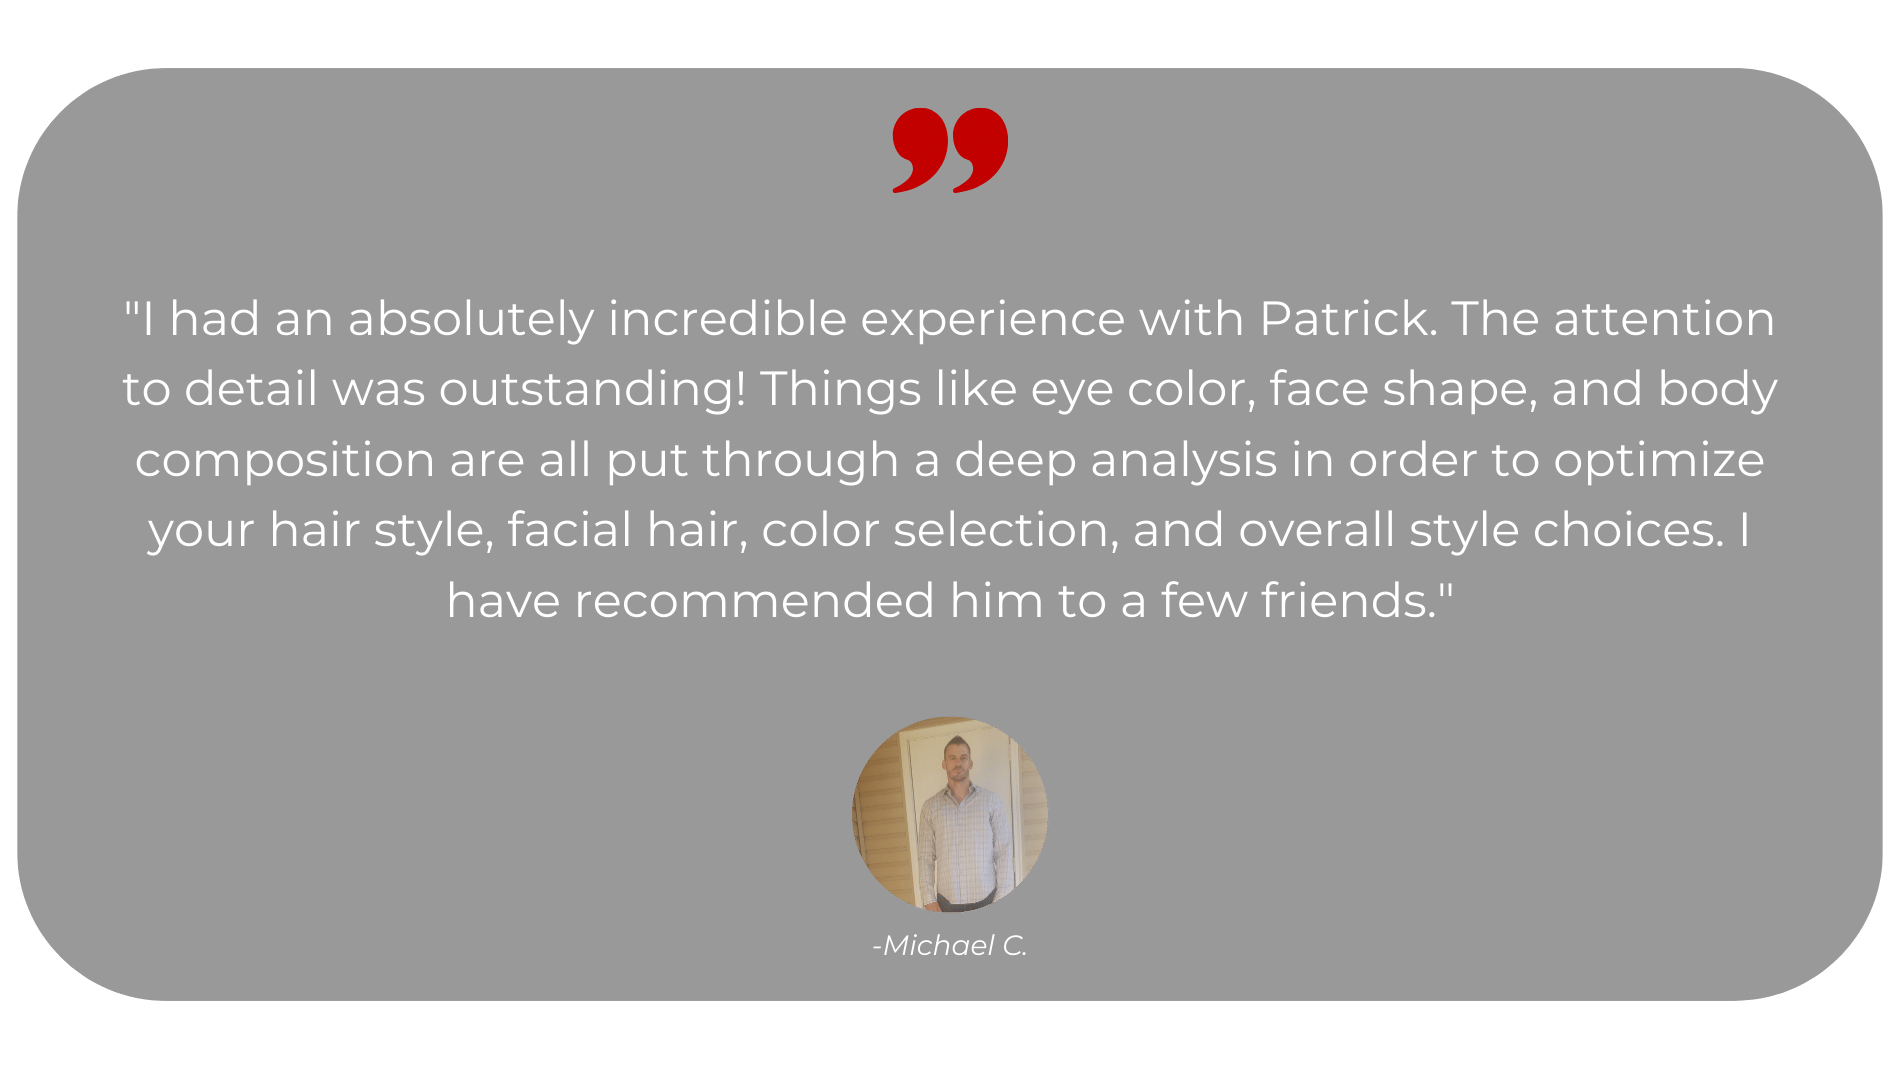 personal-stylist-Pivot-Image-consulting-review (64)-min.png